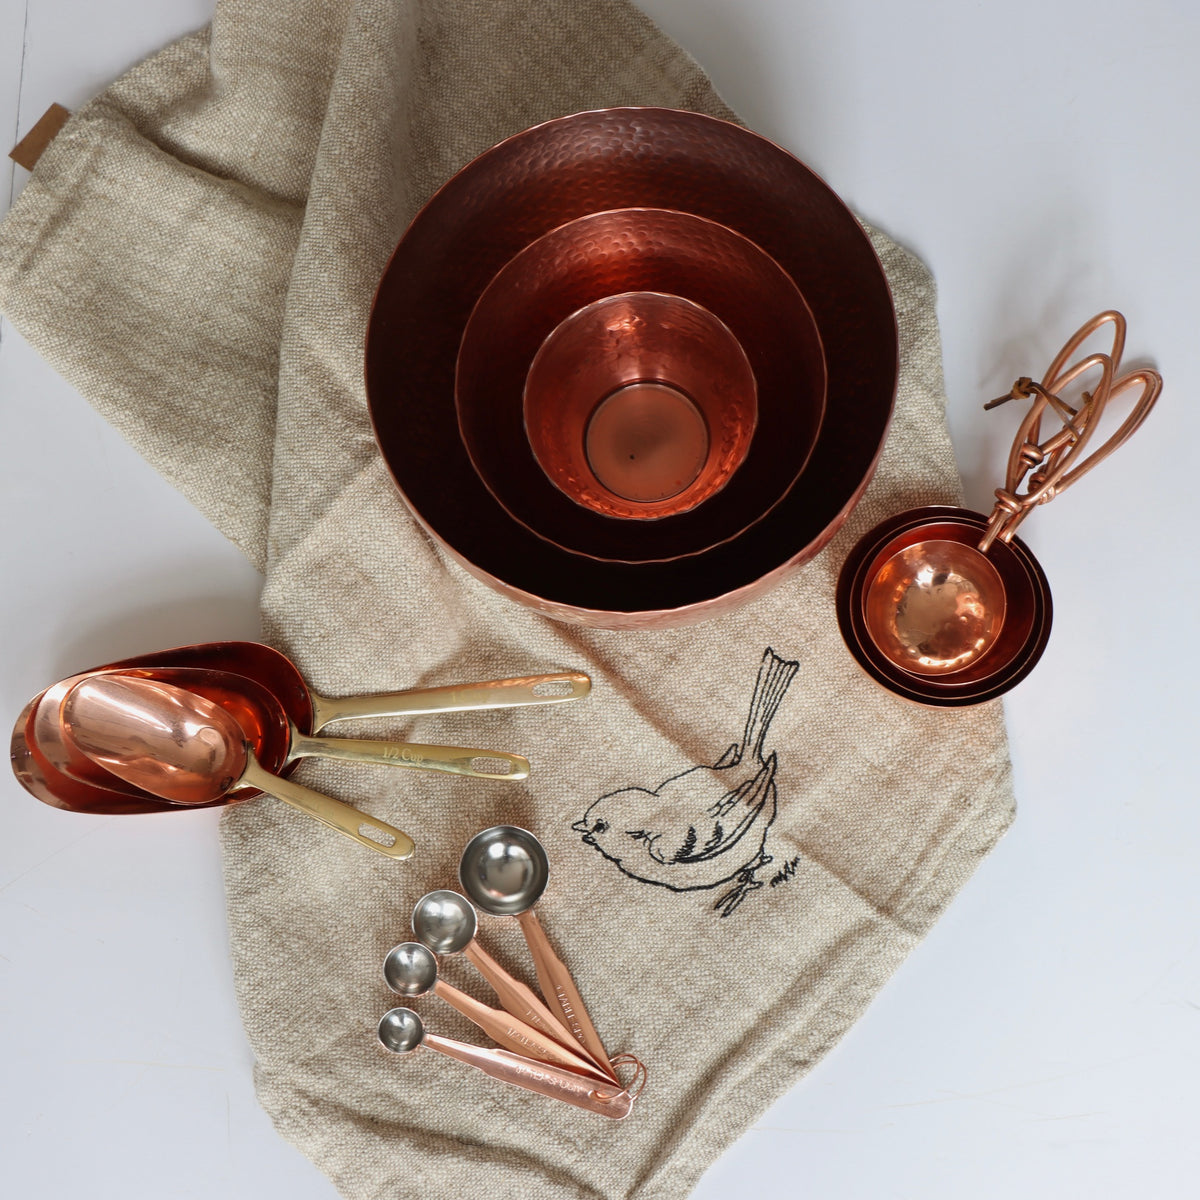 Copper Finished Stainless Steel Measuring Spoons - Set of 4 - Holistic Habitat 